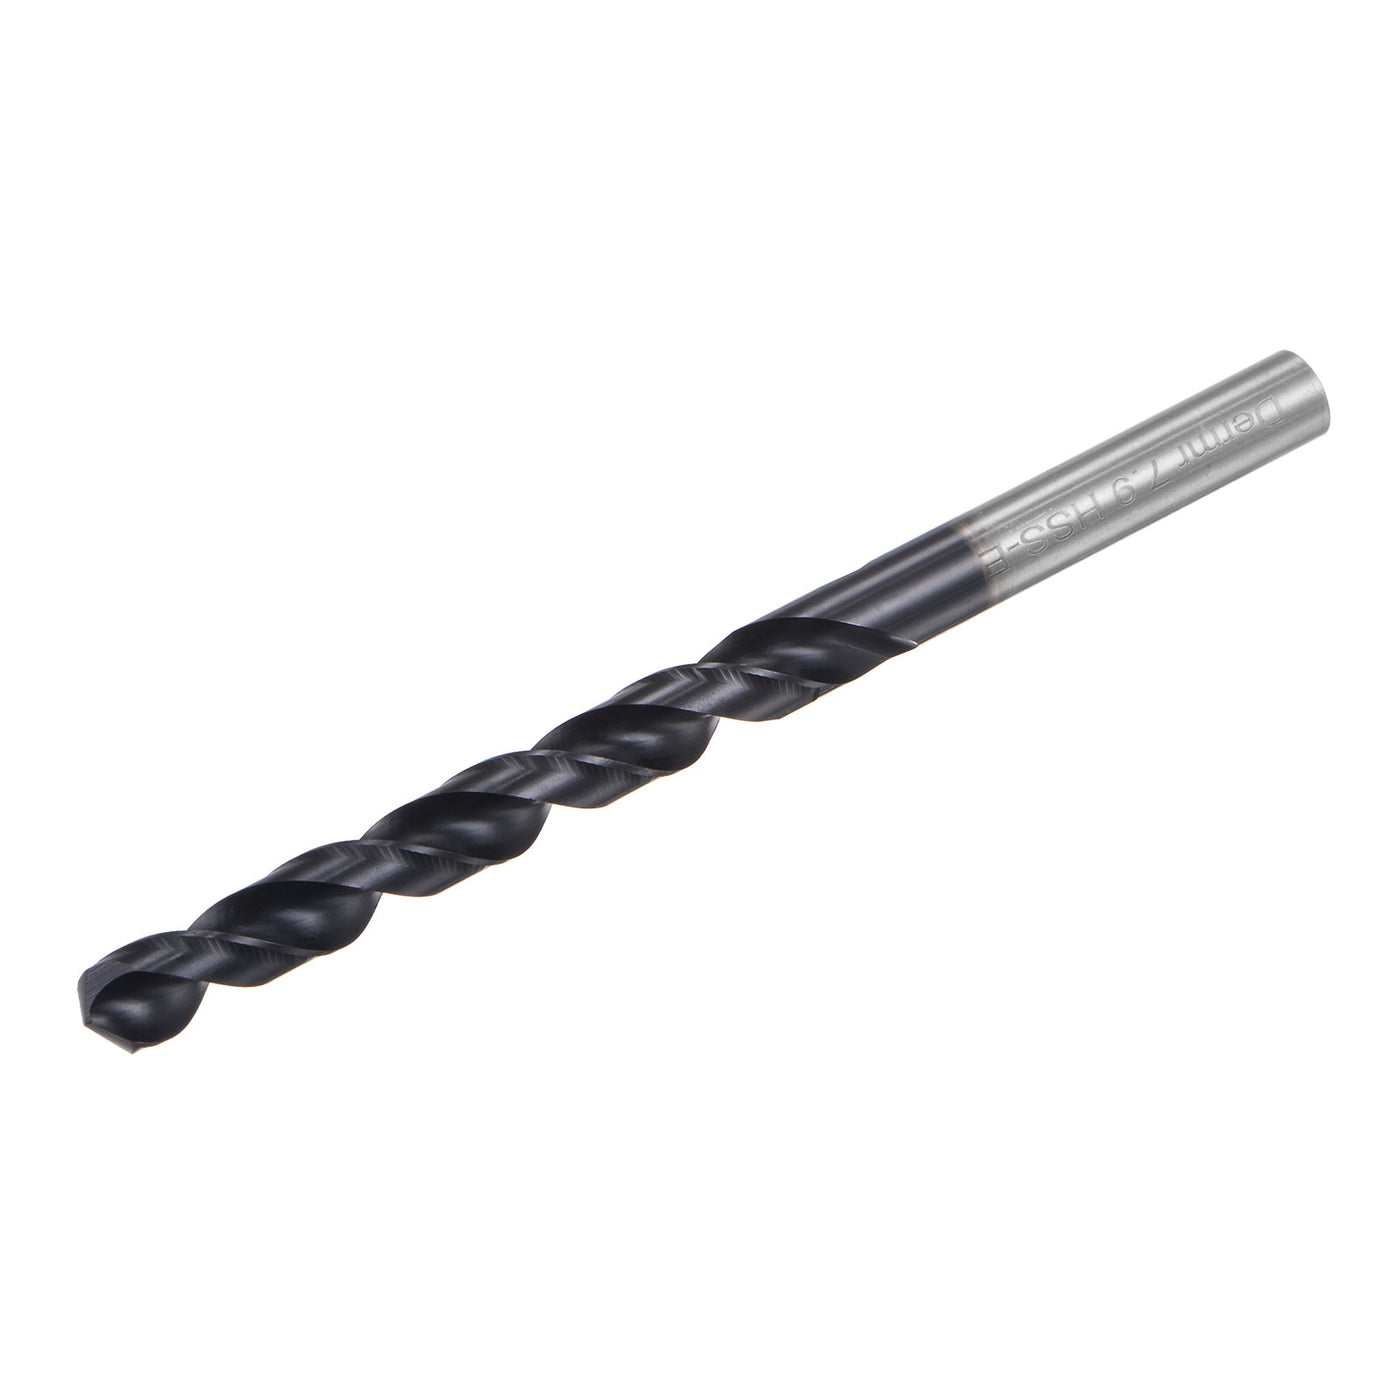 uxcell Uxcell 7.9mm M42 High Speed Steel Twist Drill Bits, TiCN Coated Round Shank Drill Bit